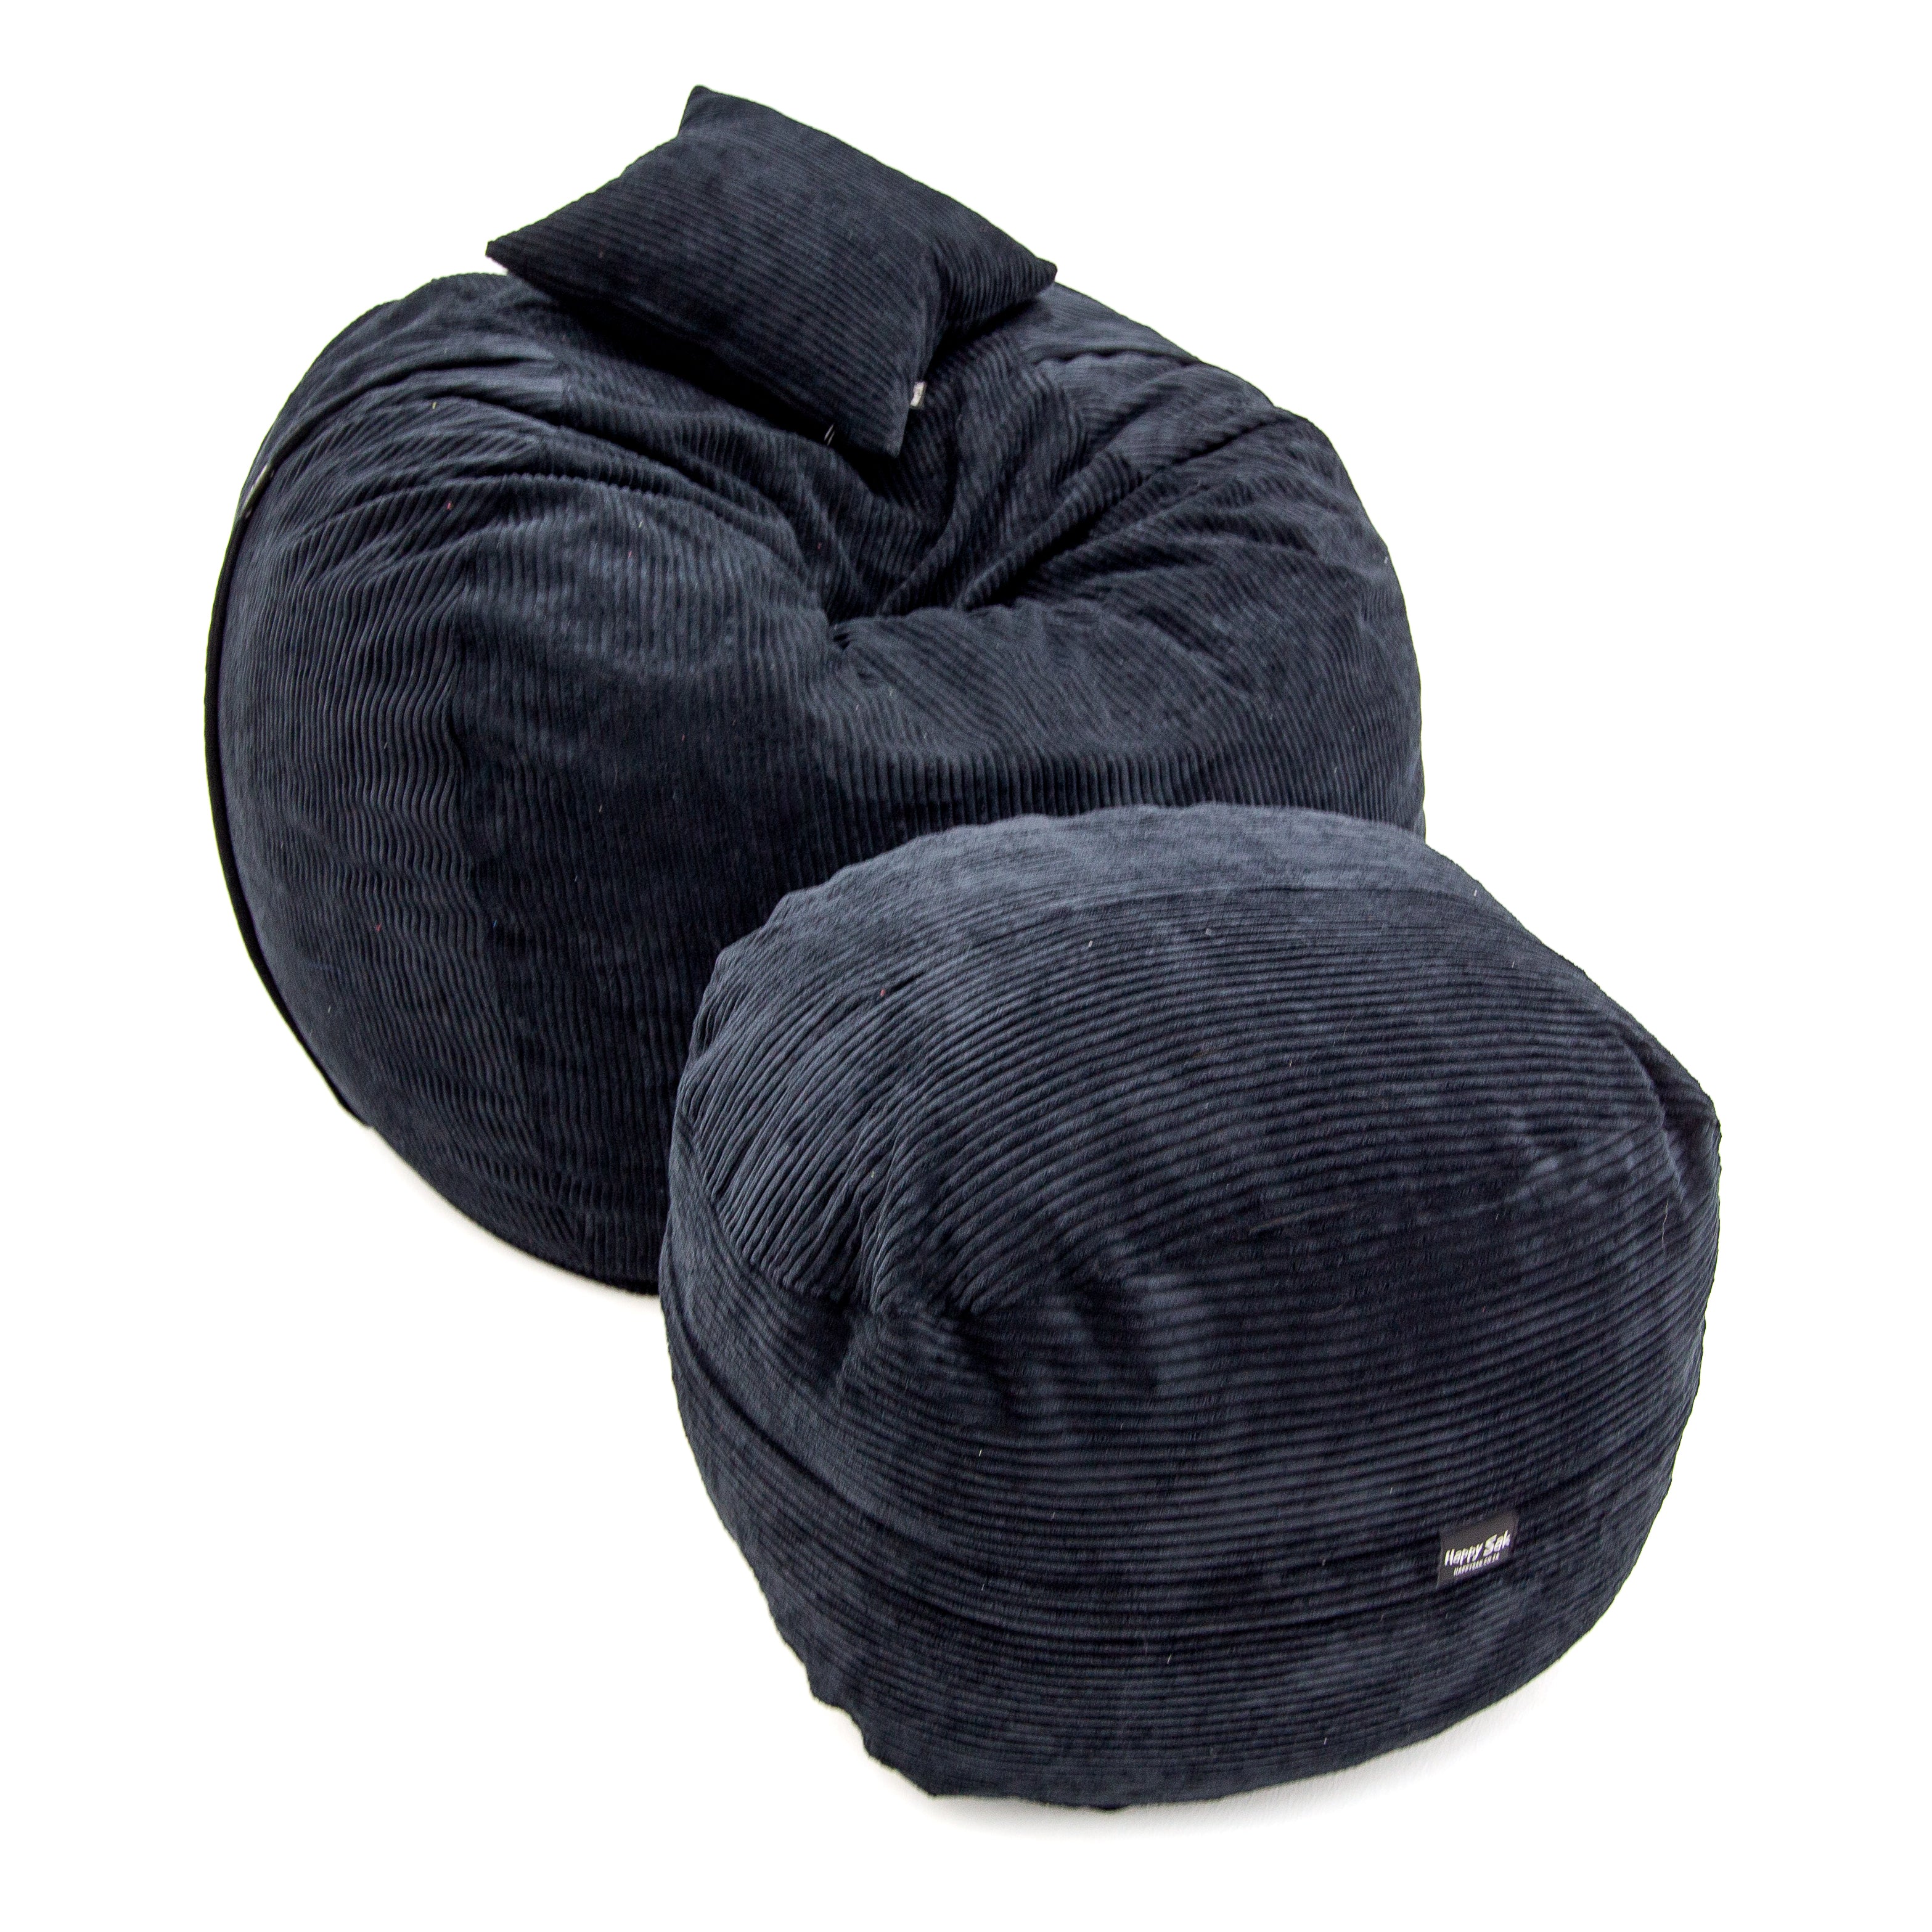 Scatters Black Corduroy Extra Cover